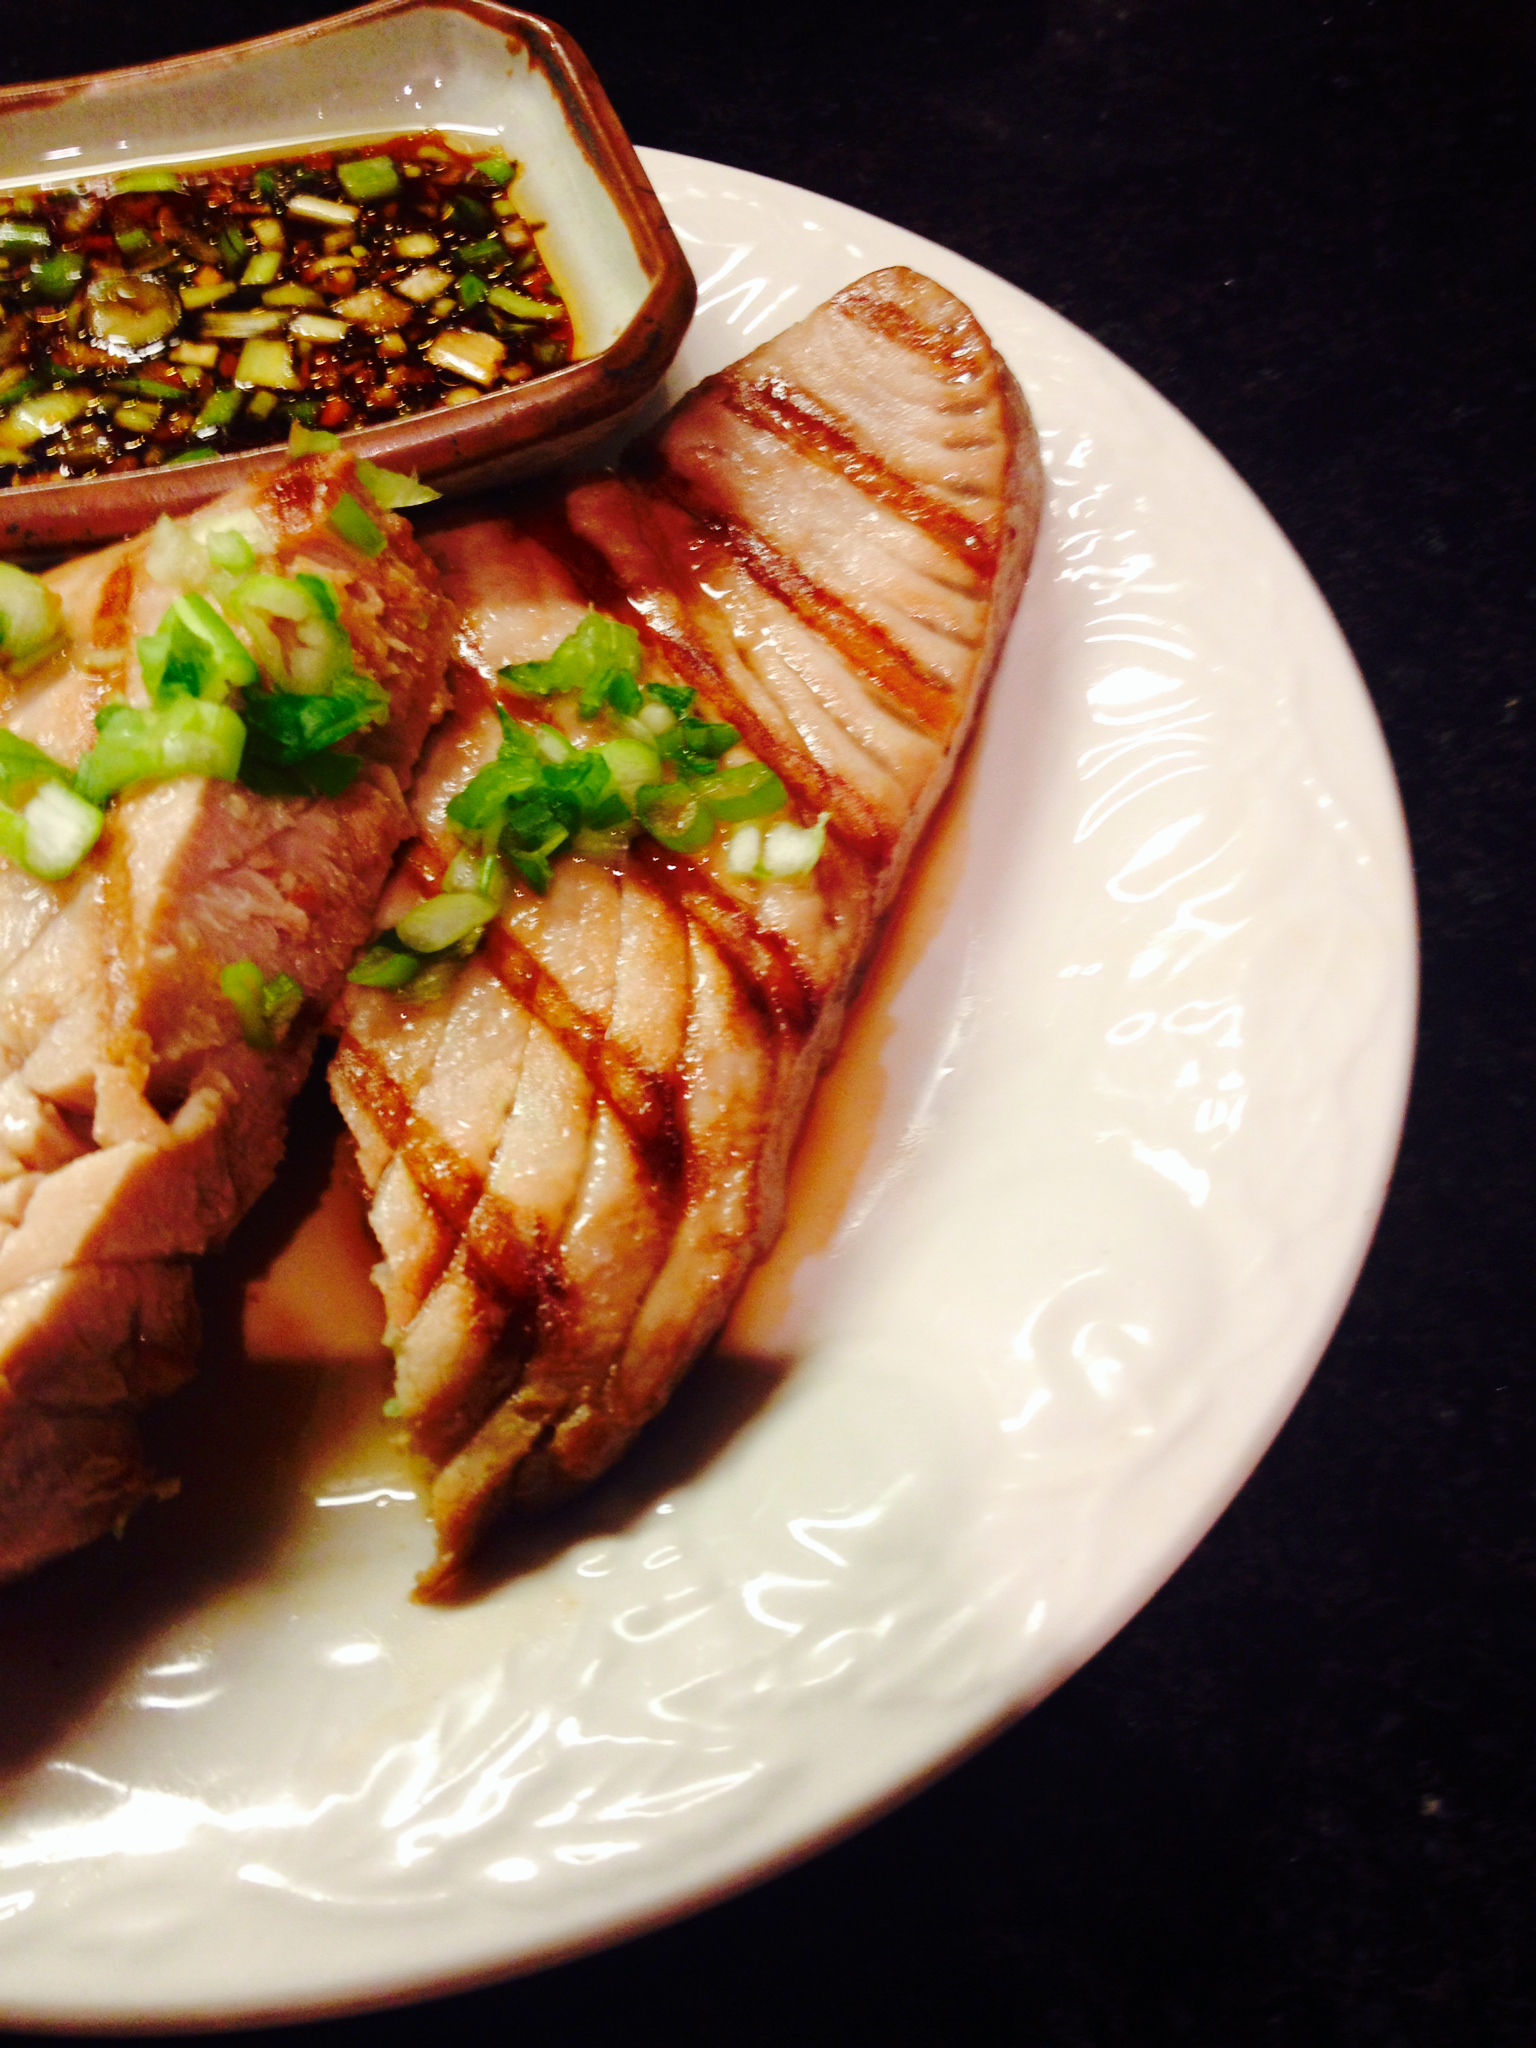 tuna steaks with sesame ginger dipping sauce :: by radish*rose